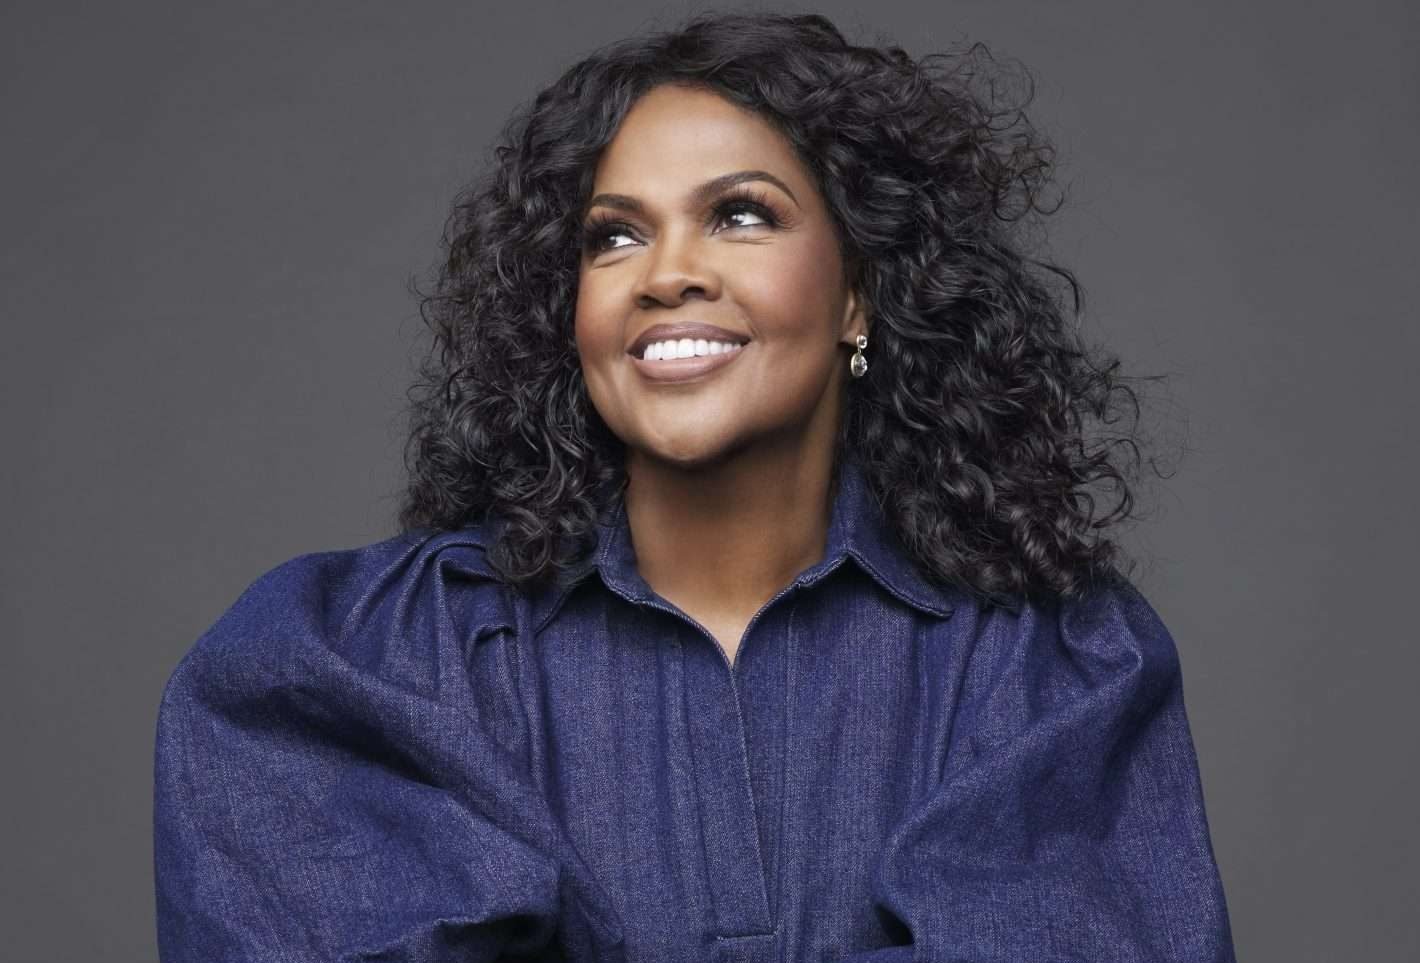 CeCe Winans releases new music “Come Jesus Come” from upcoming album